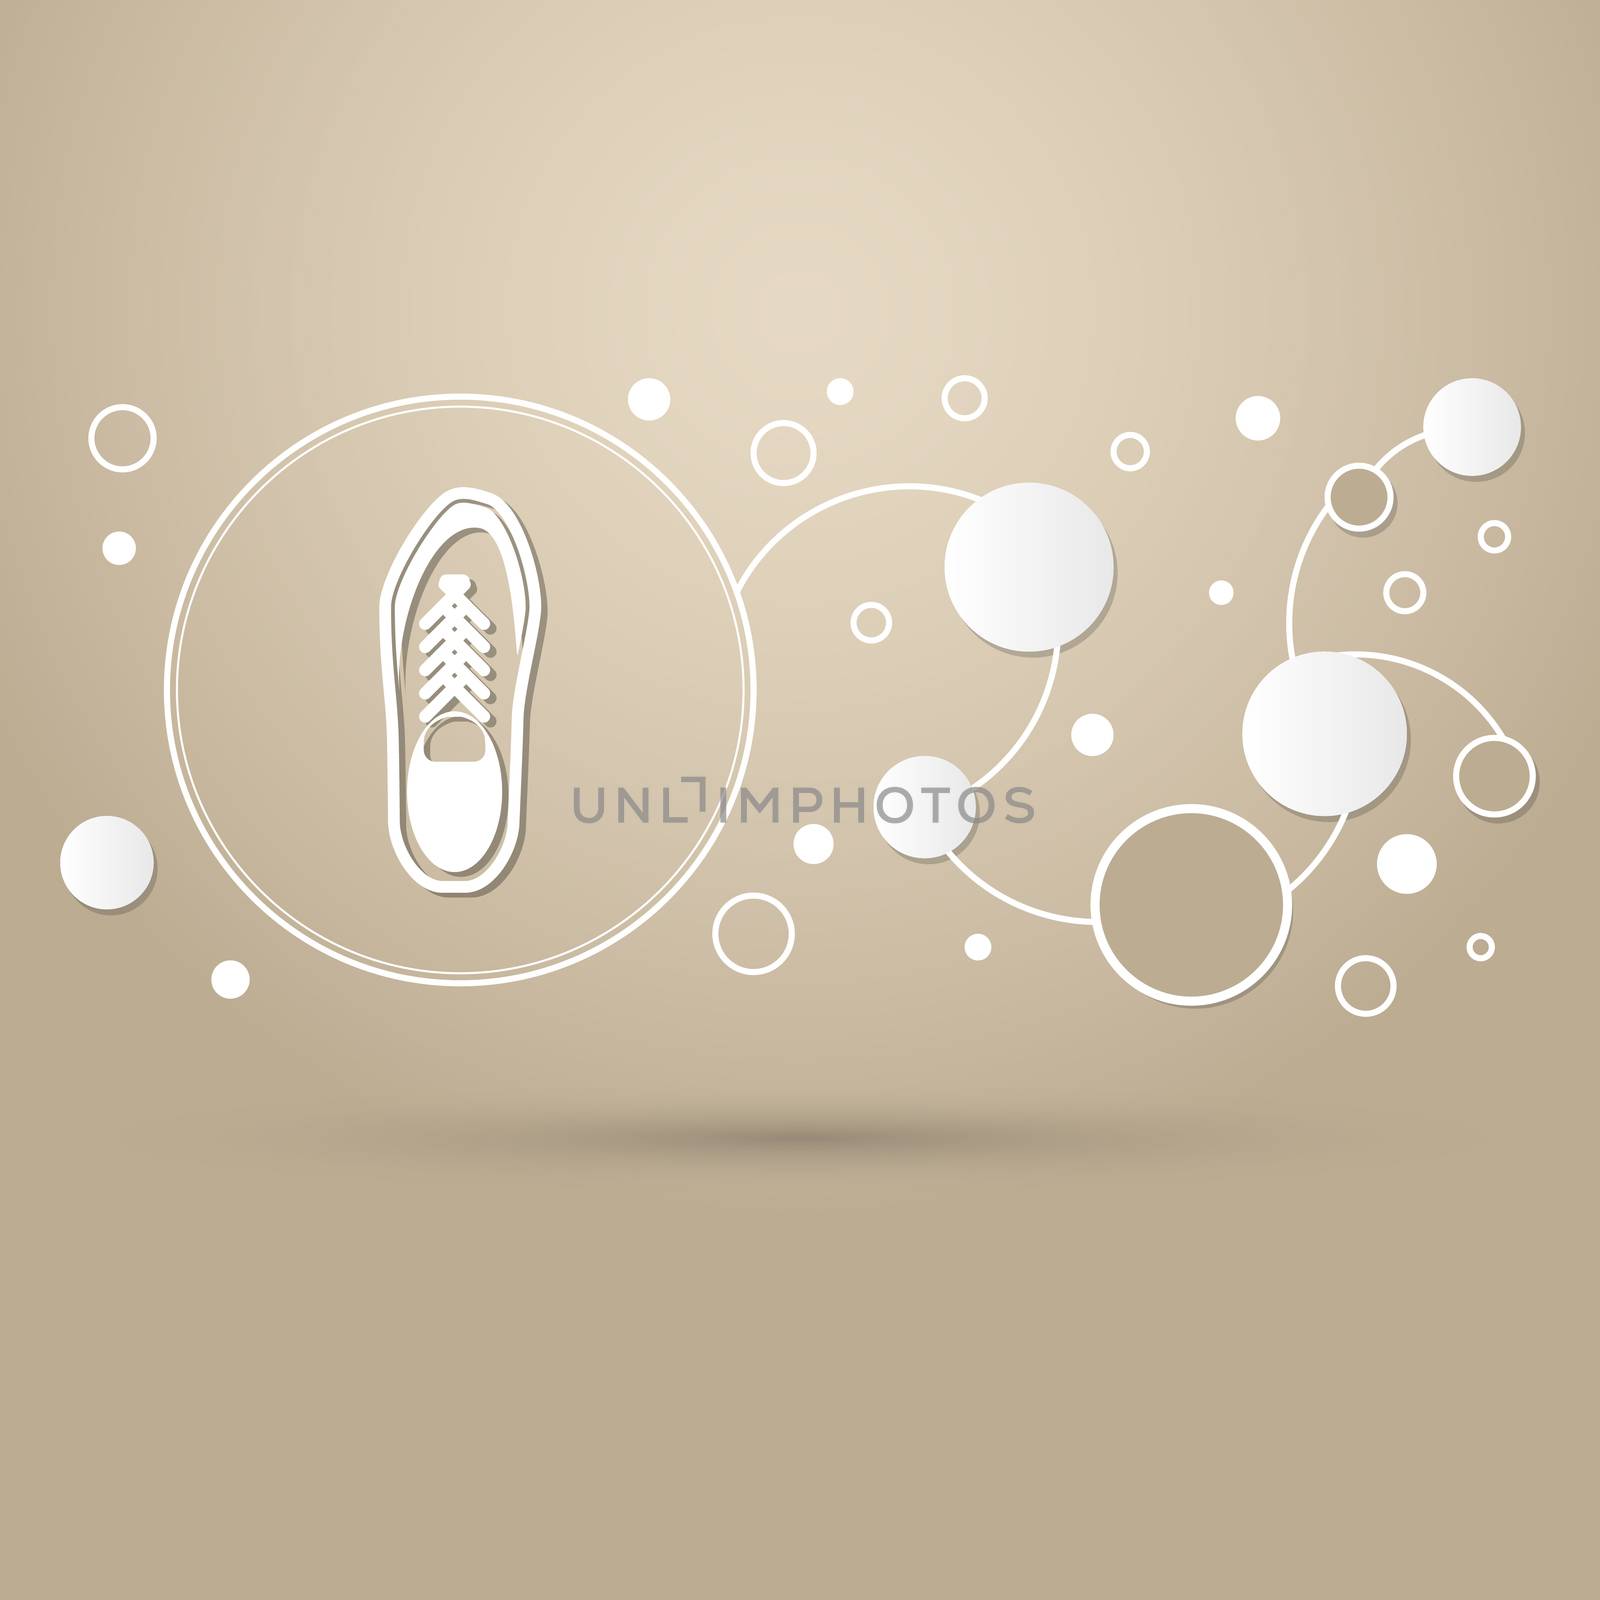 low shoe icon on a brown background with elegant style and modern design infographic.  by Adamchuk